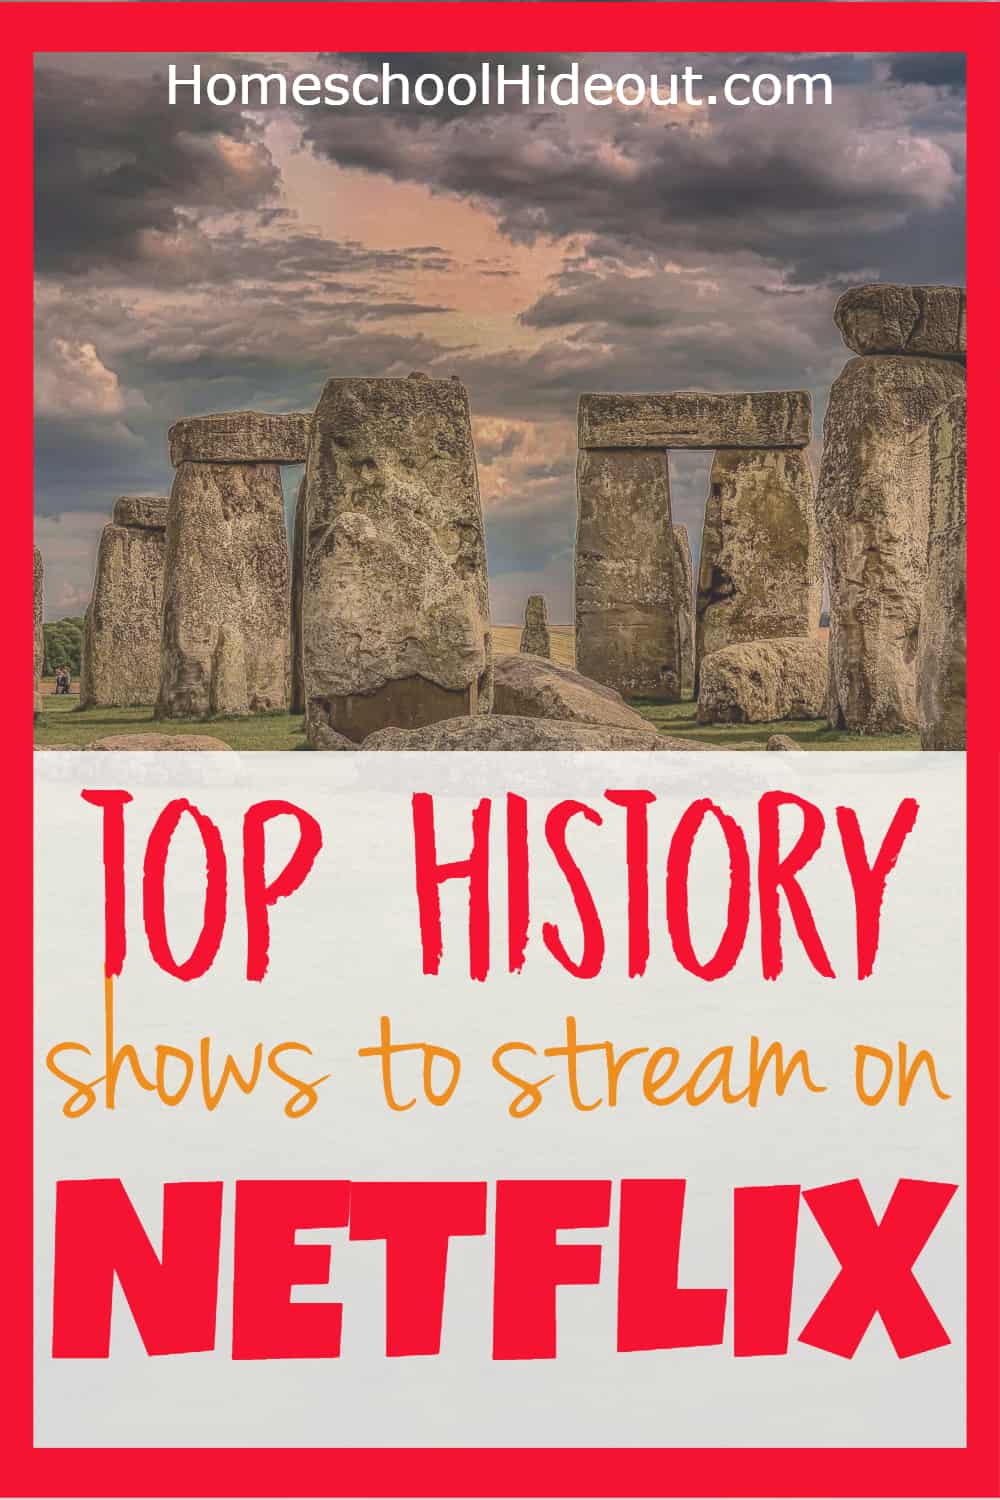 Oh wow! I've never seen most of these! Animals, nature, wars and more. This list of 100 educational shows to stream on Netflix is being printed out, as we speak!